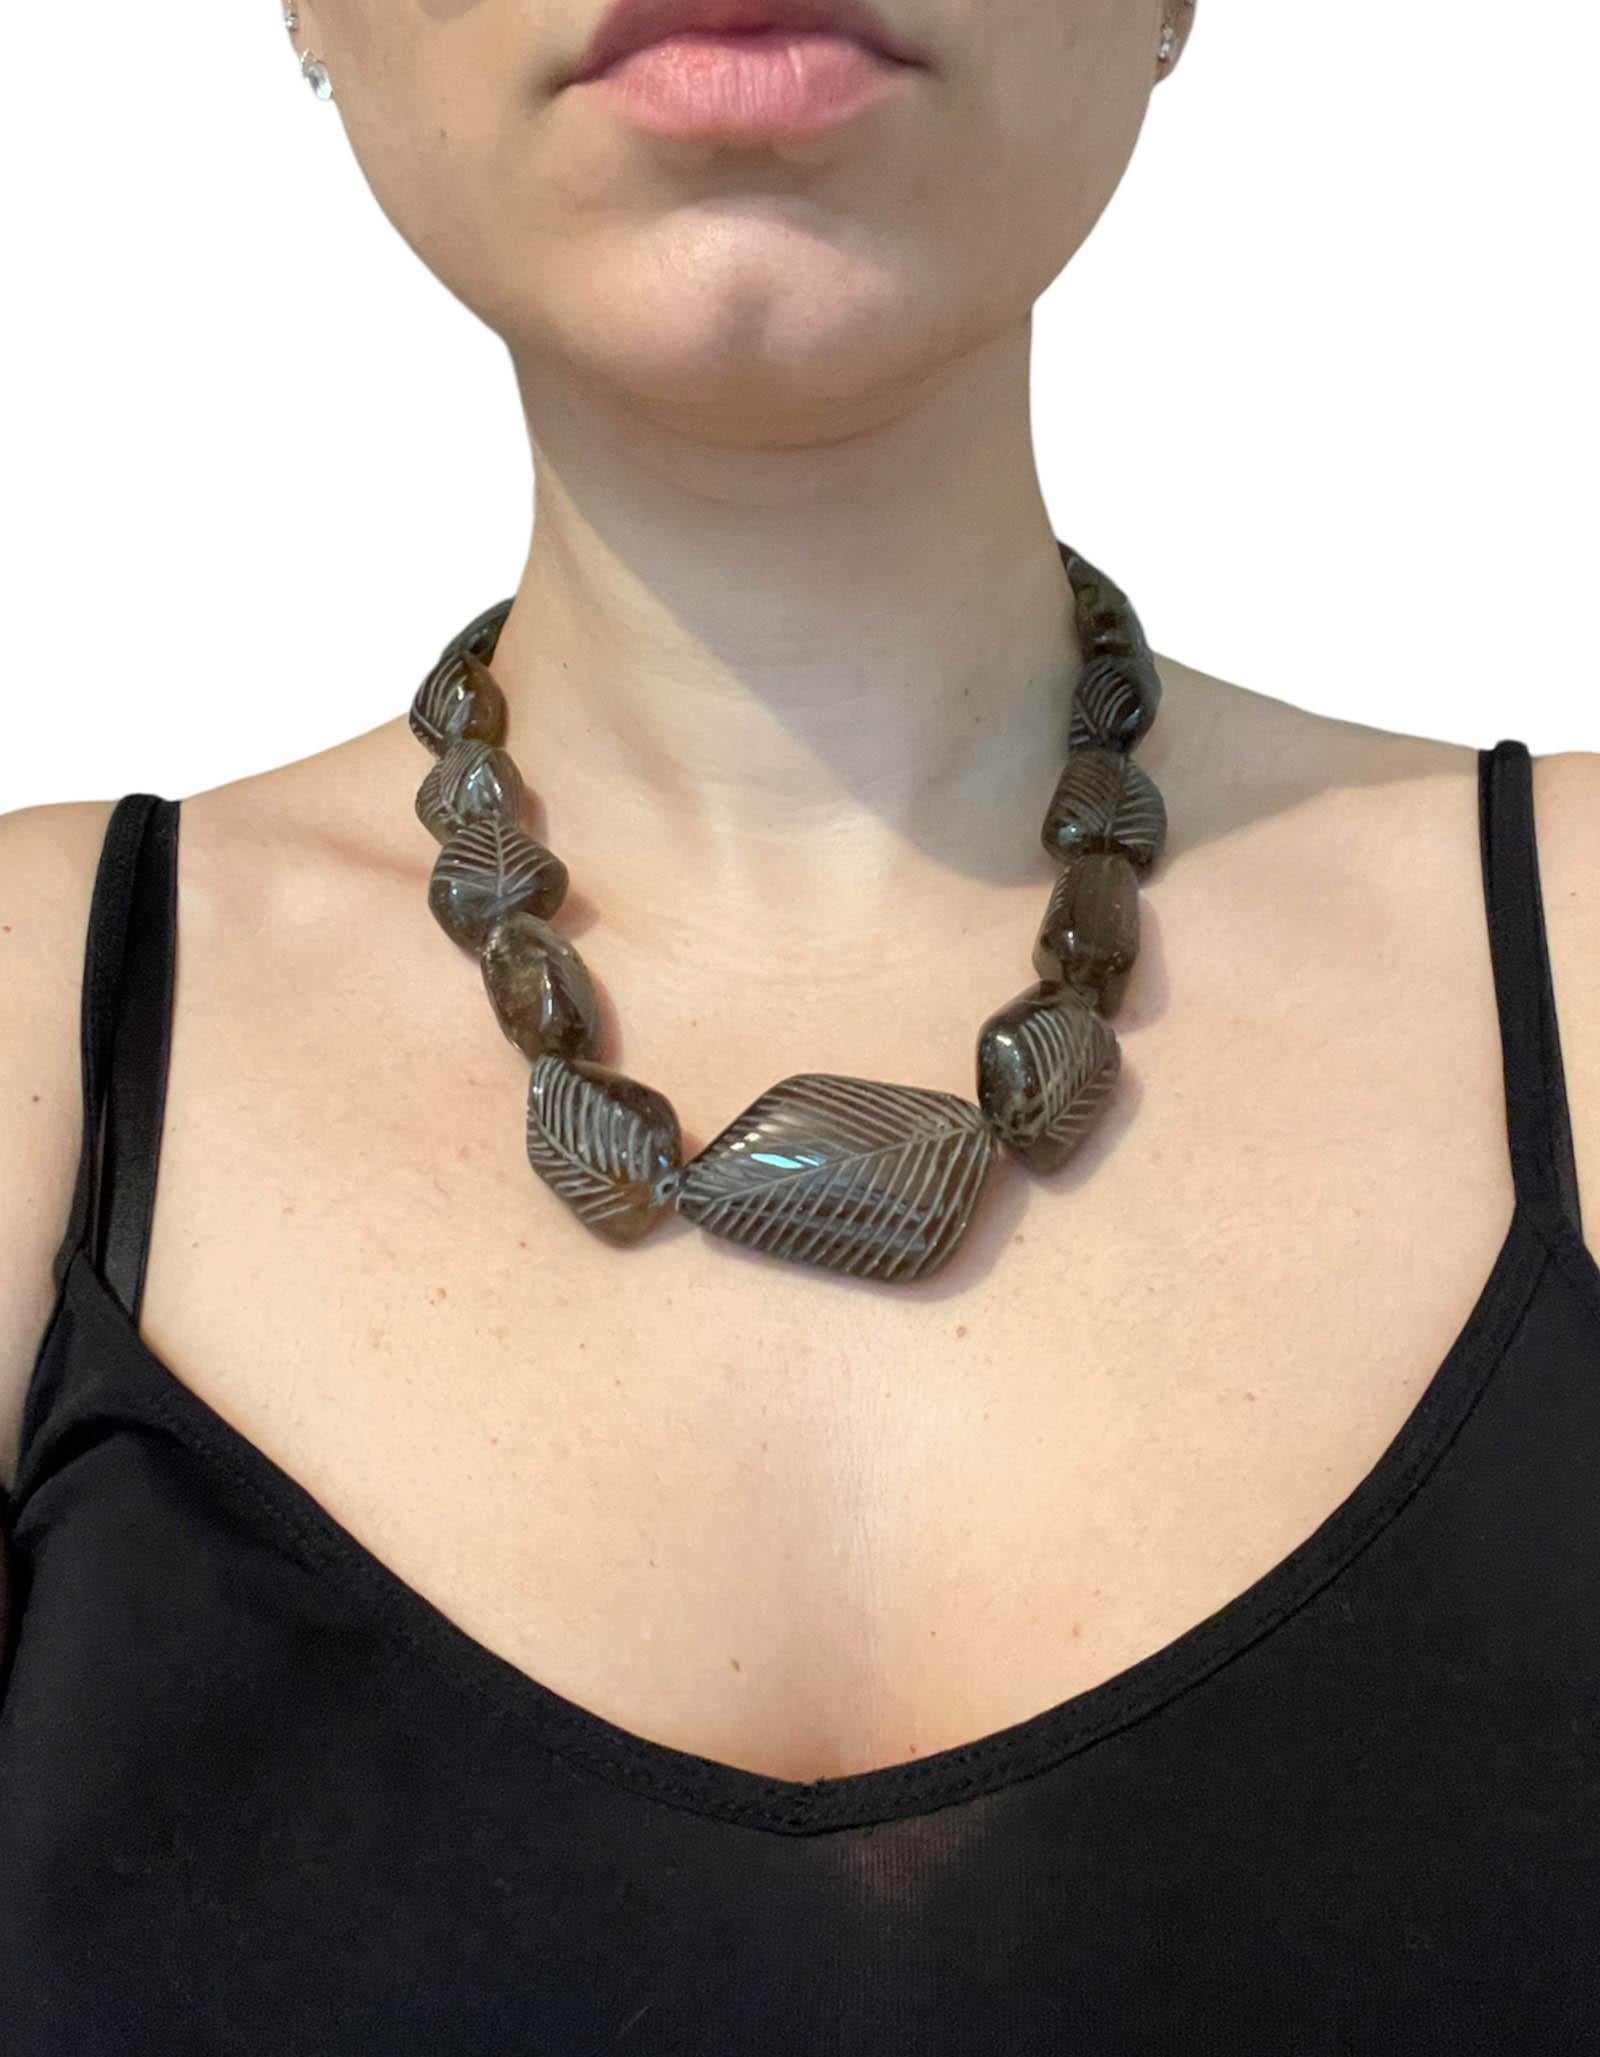 Stephen Dweck Smoky Topaz Carved Necklace.  Features graduated smokey topaz with leaf like carving.

Color: Brown
Metal: Brass
Materials: Smoky topaz
Hallmarks: 1991 Stephen Dweck
Closure/Opening: Toggle
Overall Condition: Very good/excellent. 